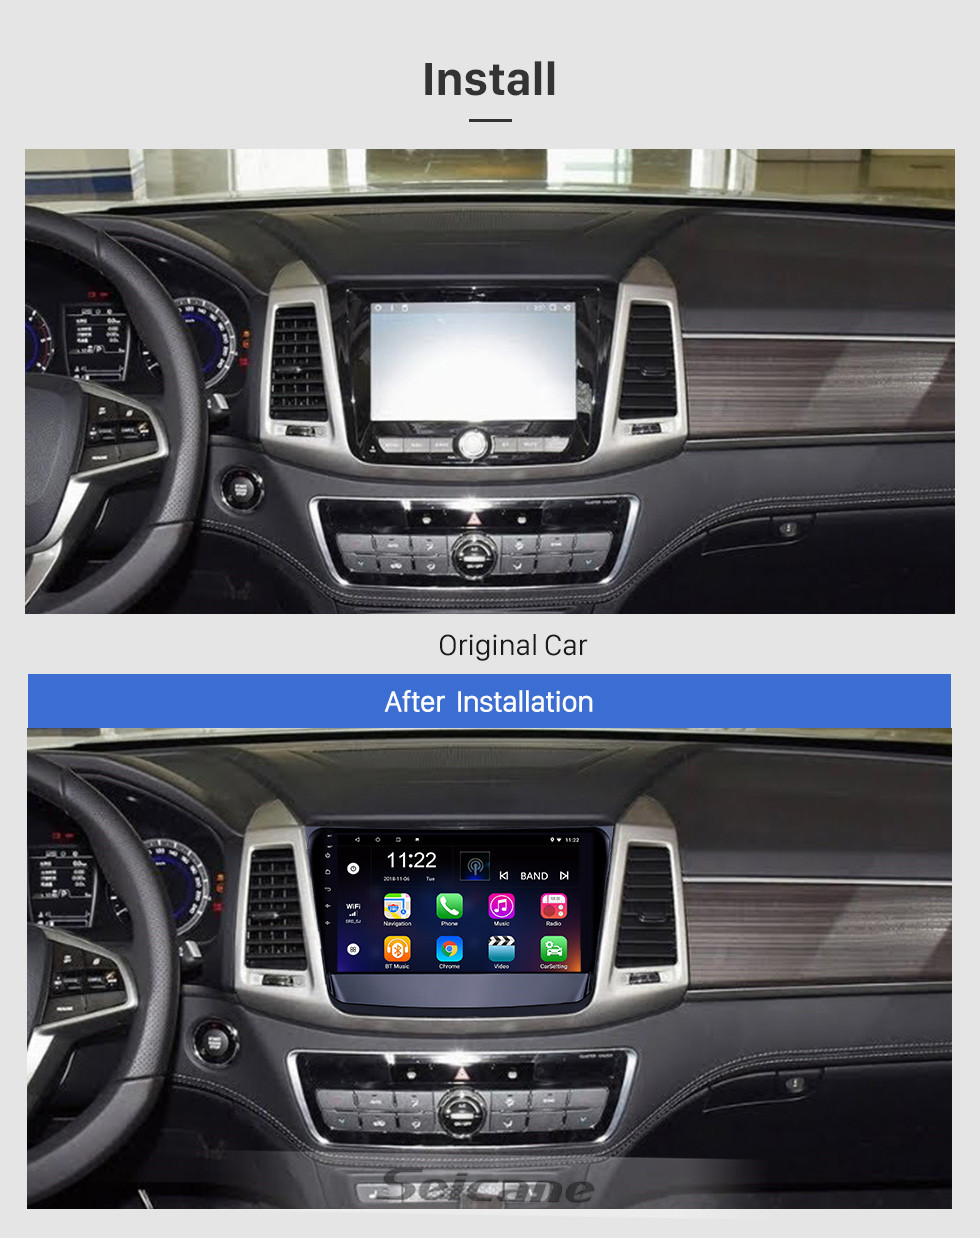 Seicane 10,1 pouces Android 10.0 HD Radio tactile Navigation GPS pour 2019 Ssang Yong Rexton avec Bluetooth WIFI AUX support Carplay Mirror Link